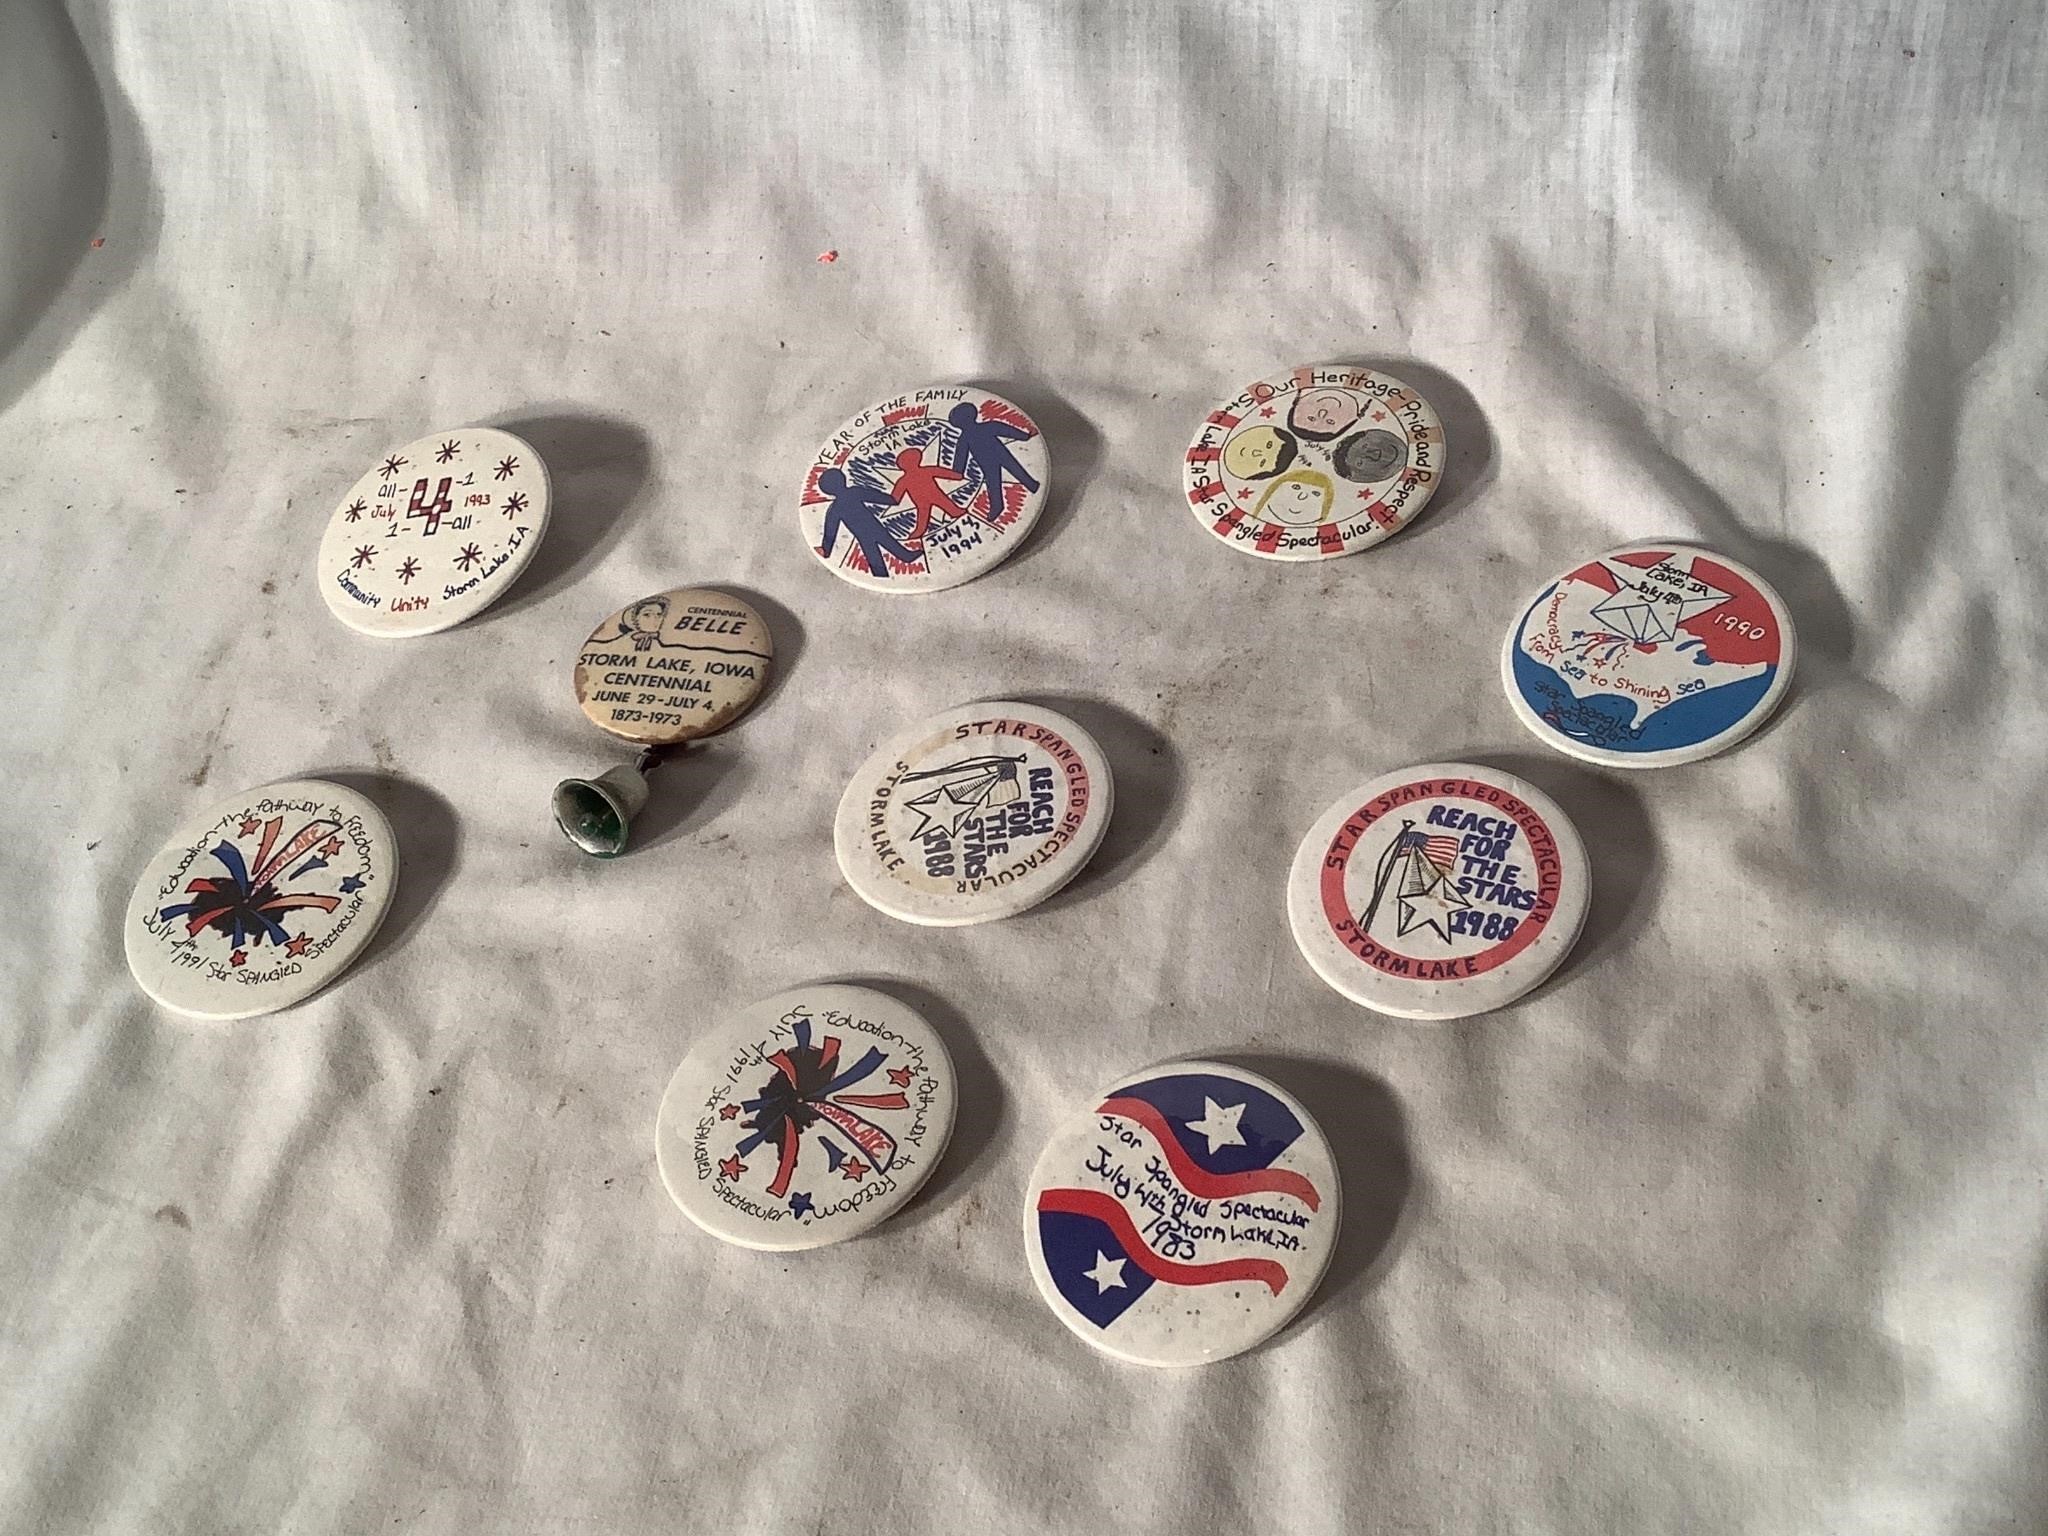 Storm Lake Spectacular Pins from 80’s & 90’s